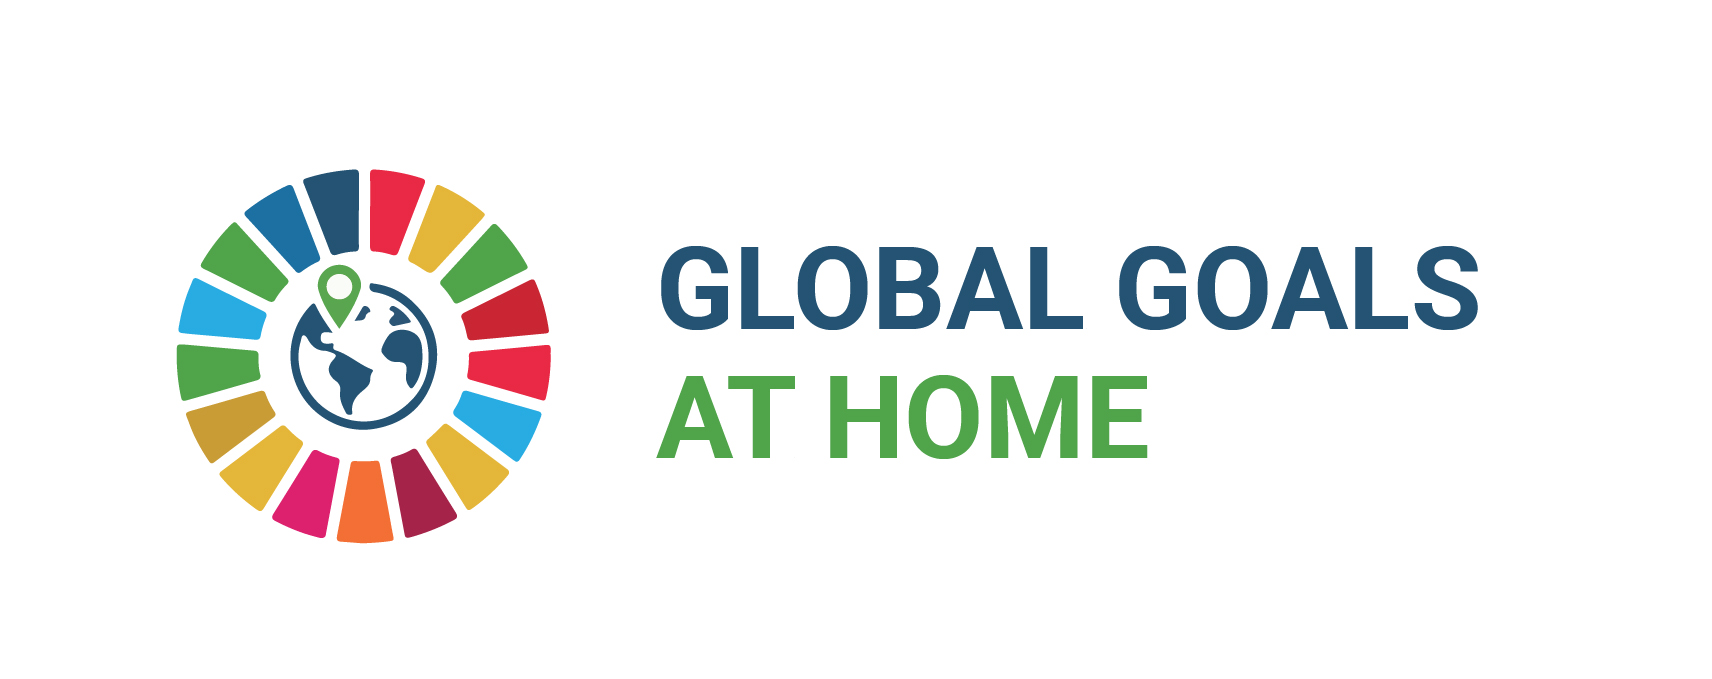 Global Goals at Home